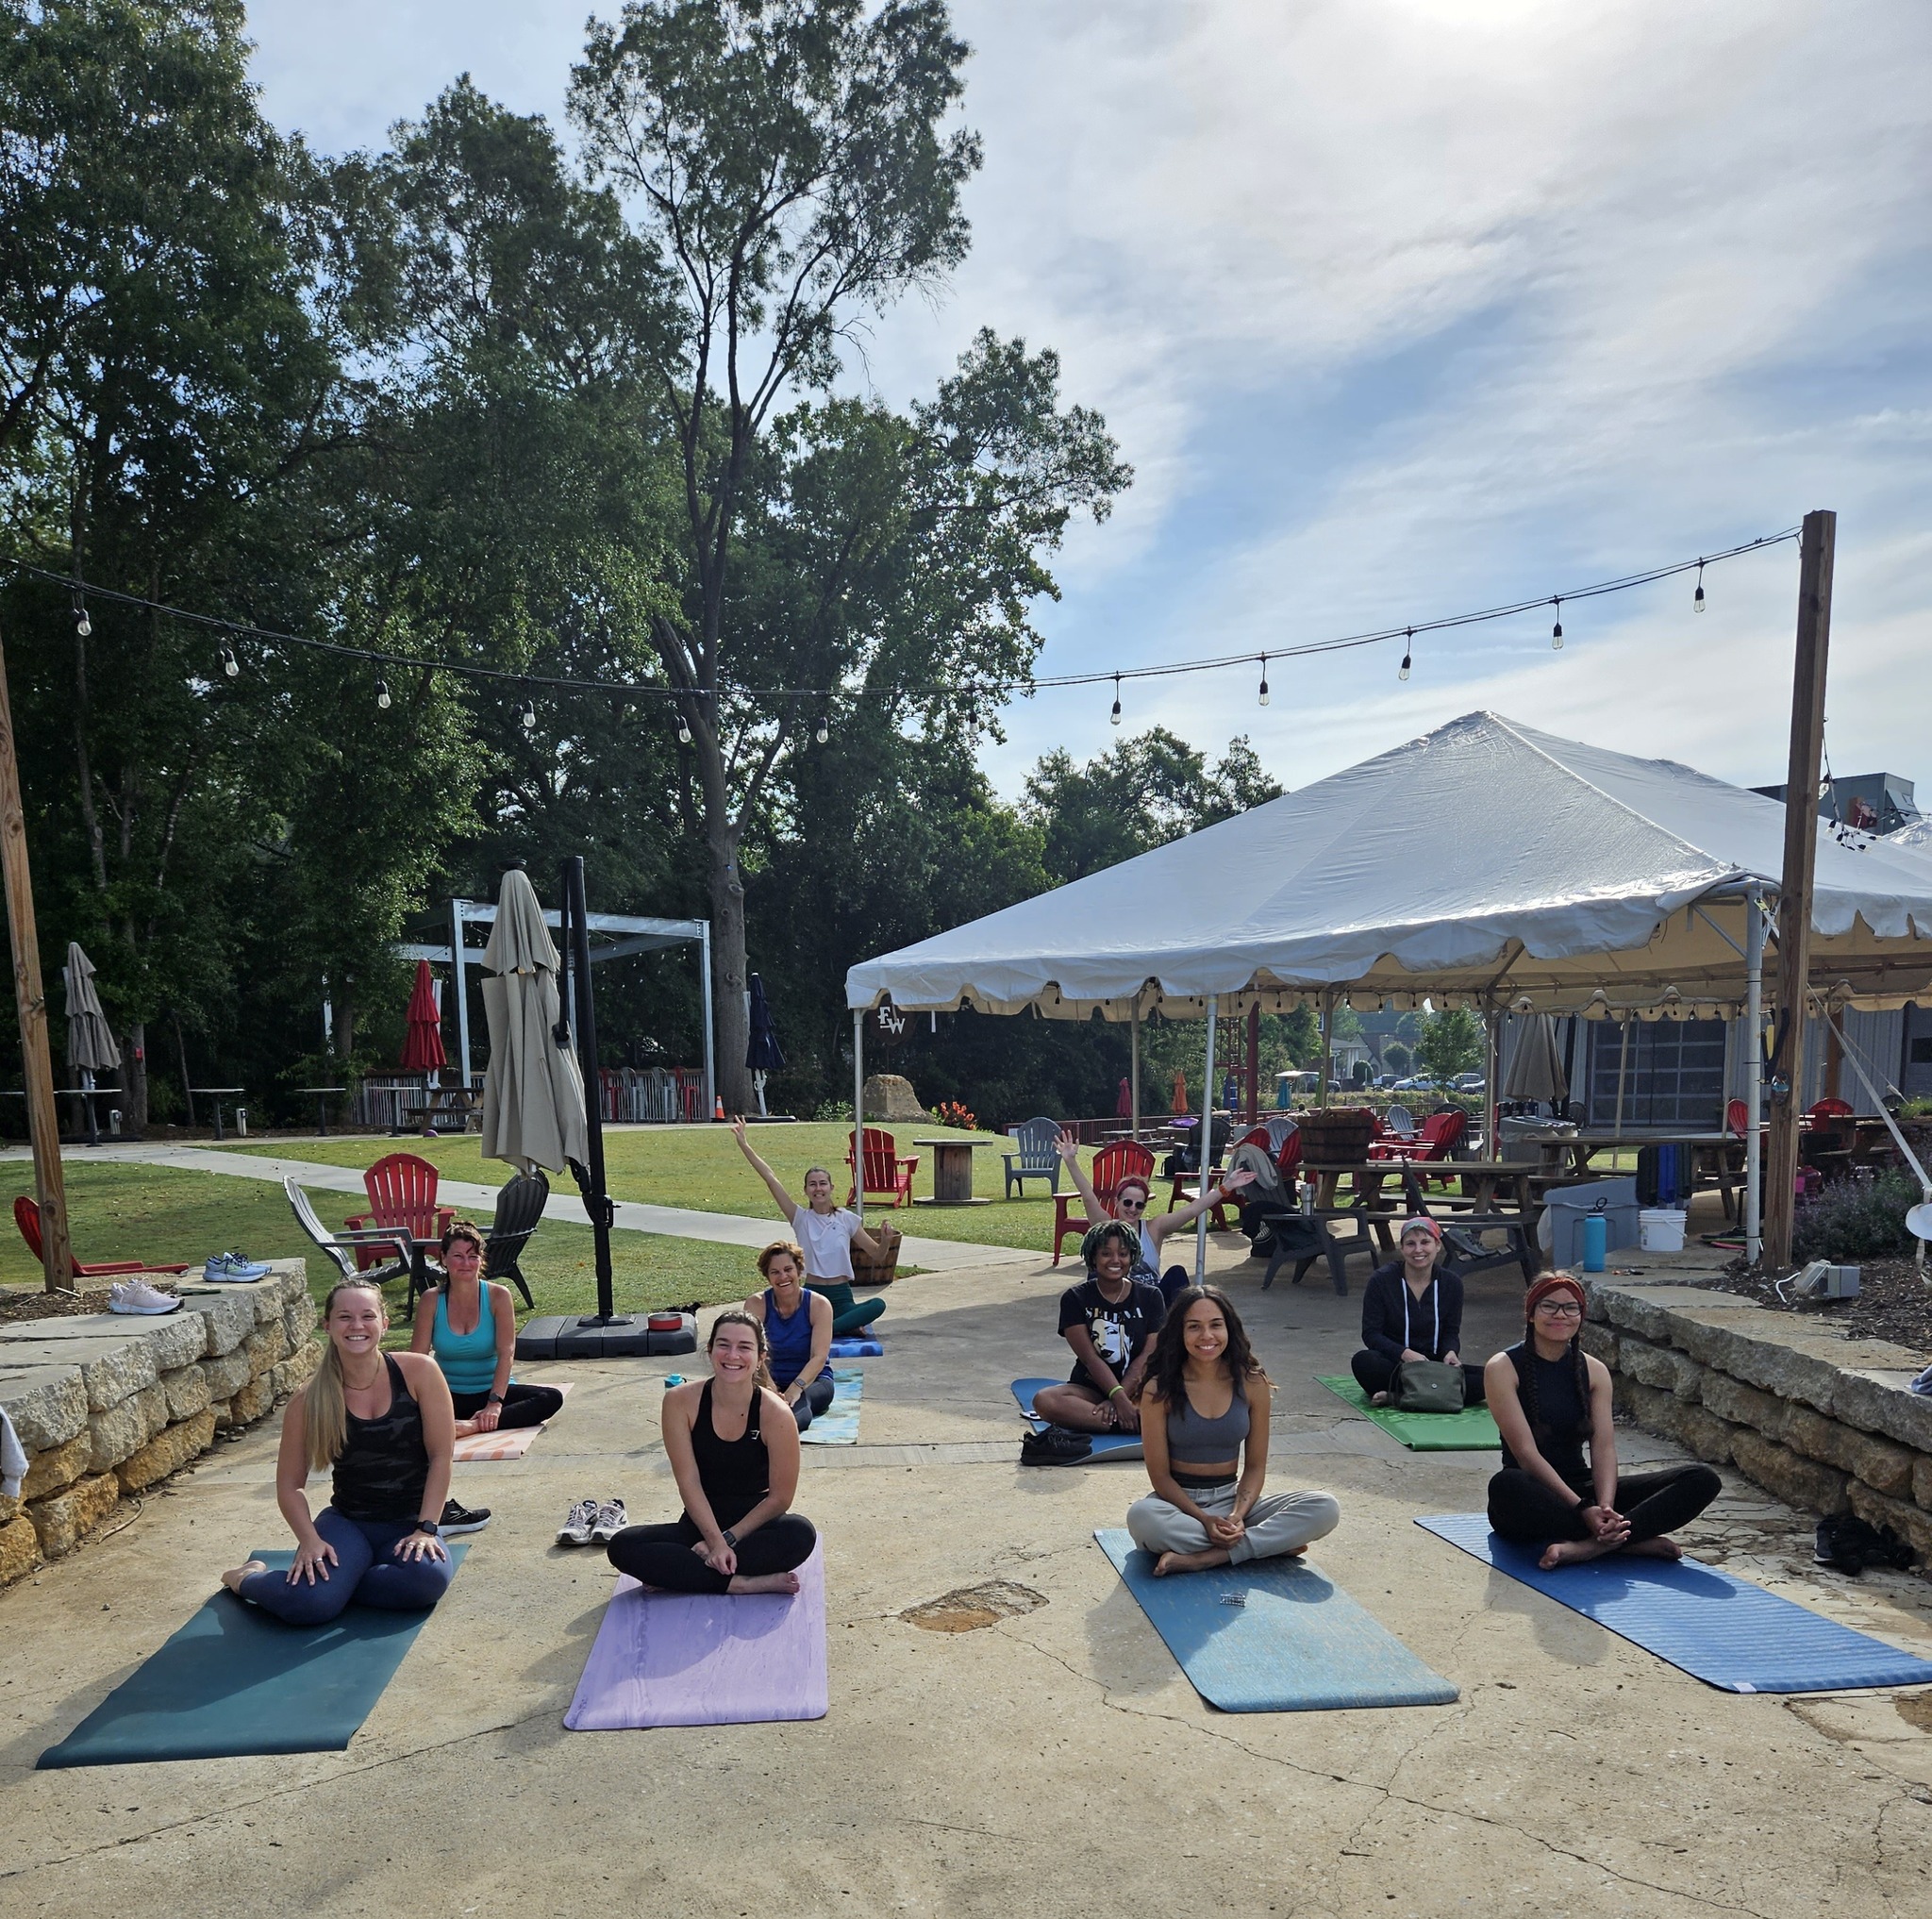 Join us tomorrow morning at 9 am for Monday Morning Yoga. A refreshing flow to kickstart your week.

Bring your own mat and join our FREE yoga class!

*Donations for the instructor are welcome.

#yogaonthelawn #goupstate #intheburg #spartanburgevents #outdooryoga #freeyoga @lifeinlisaland